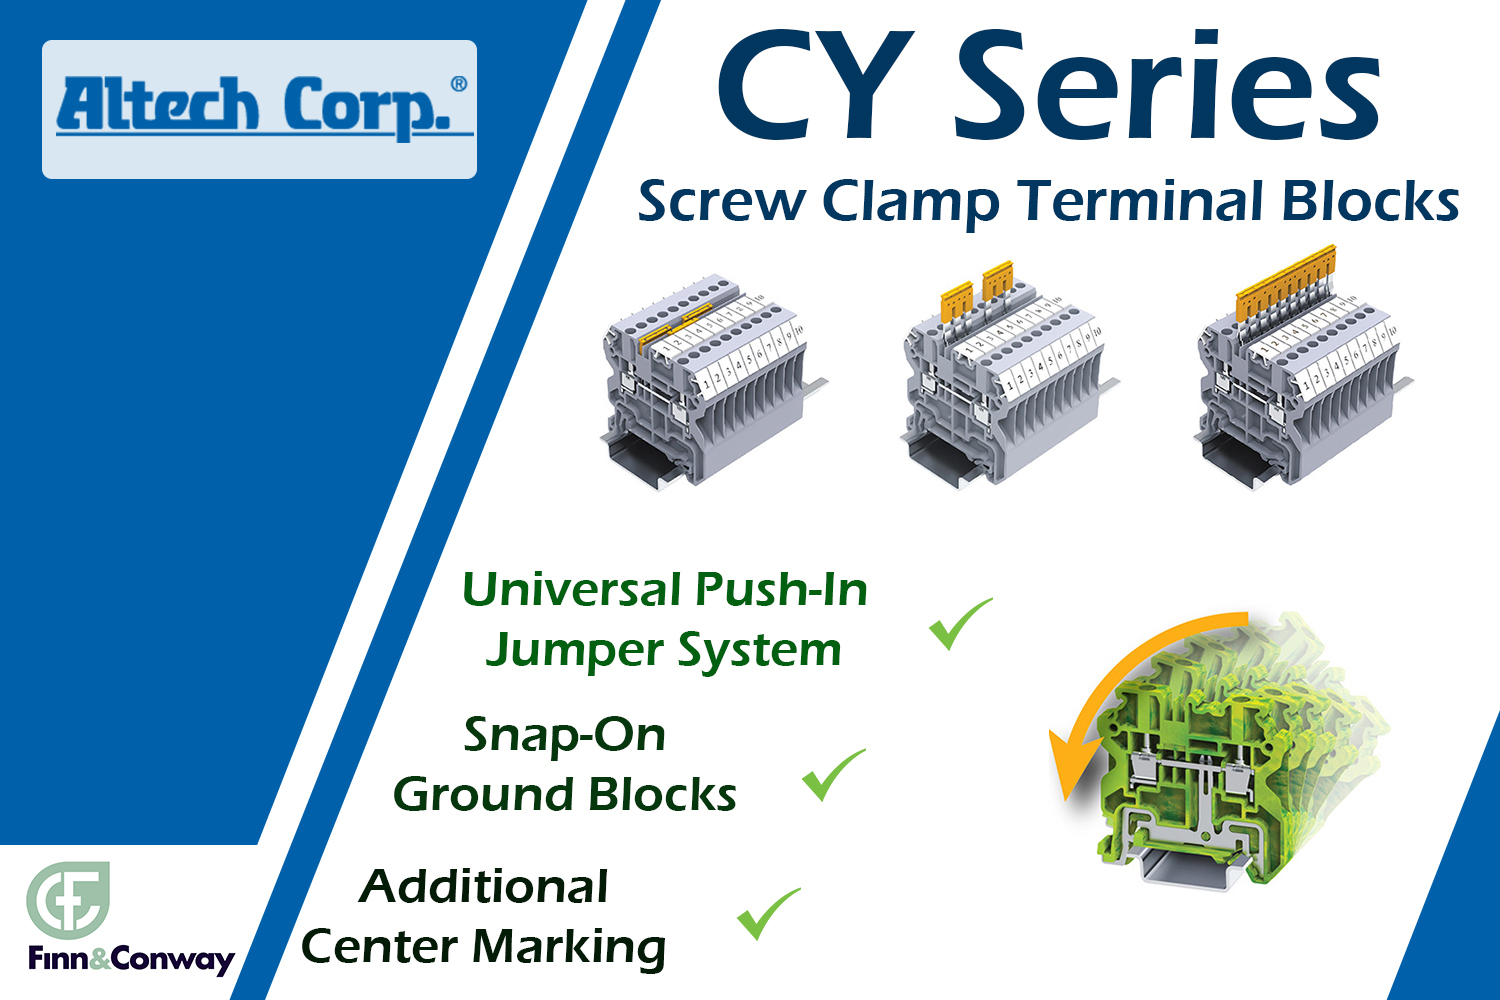 New! Terminal Blocks With Push-In Jumpers (ALTECH)